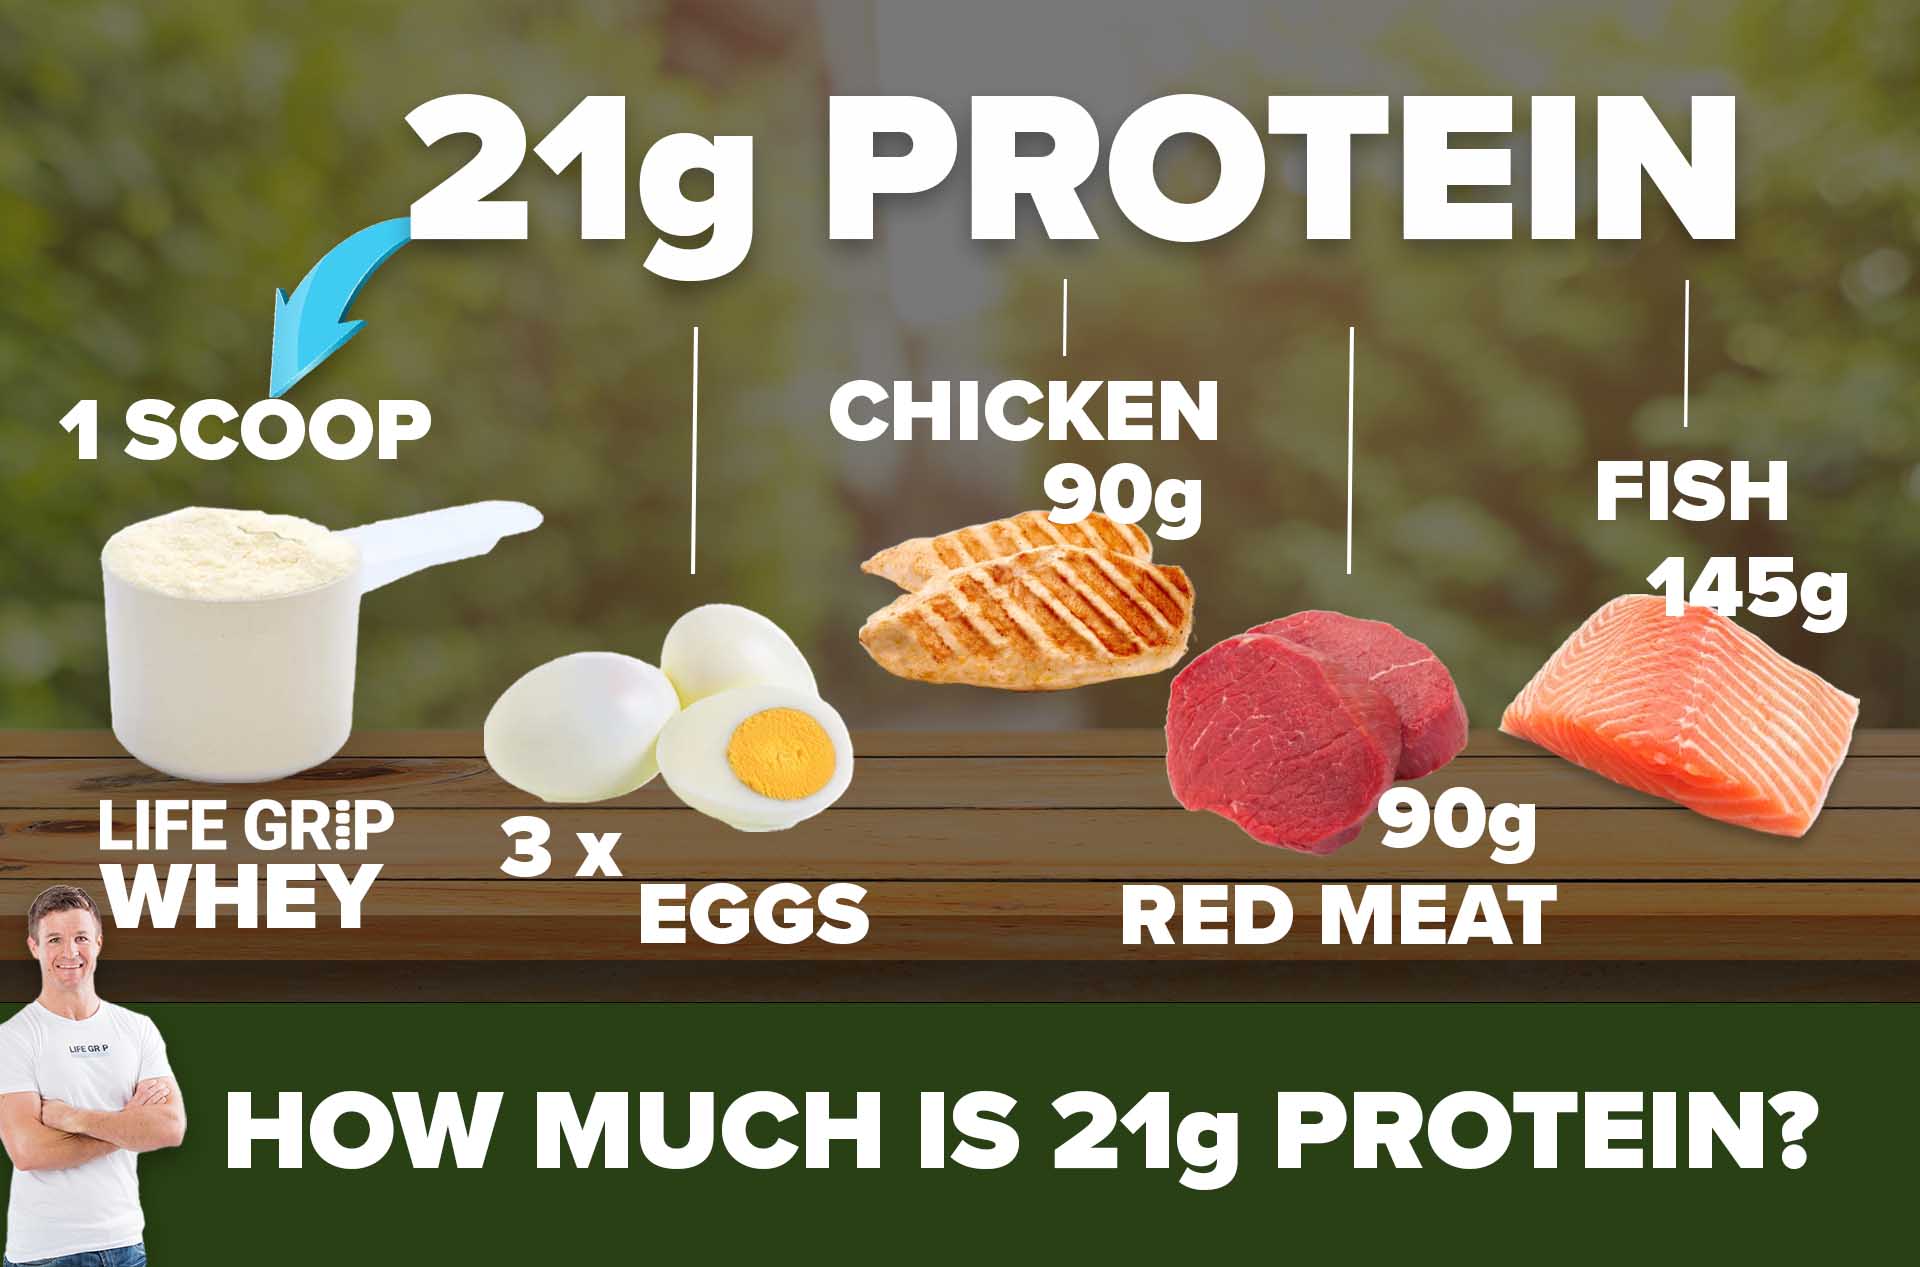 Life Grip: Protein Types and How Much - Life Grip